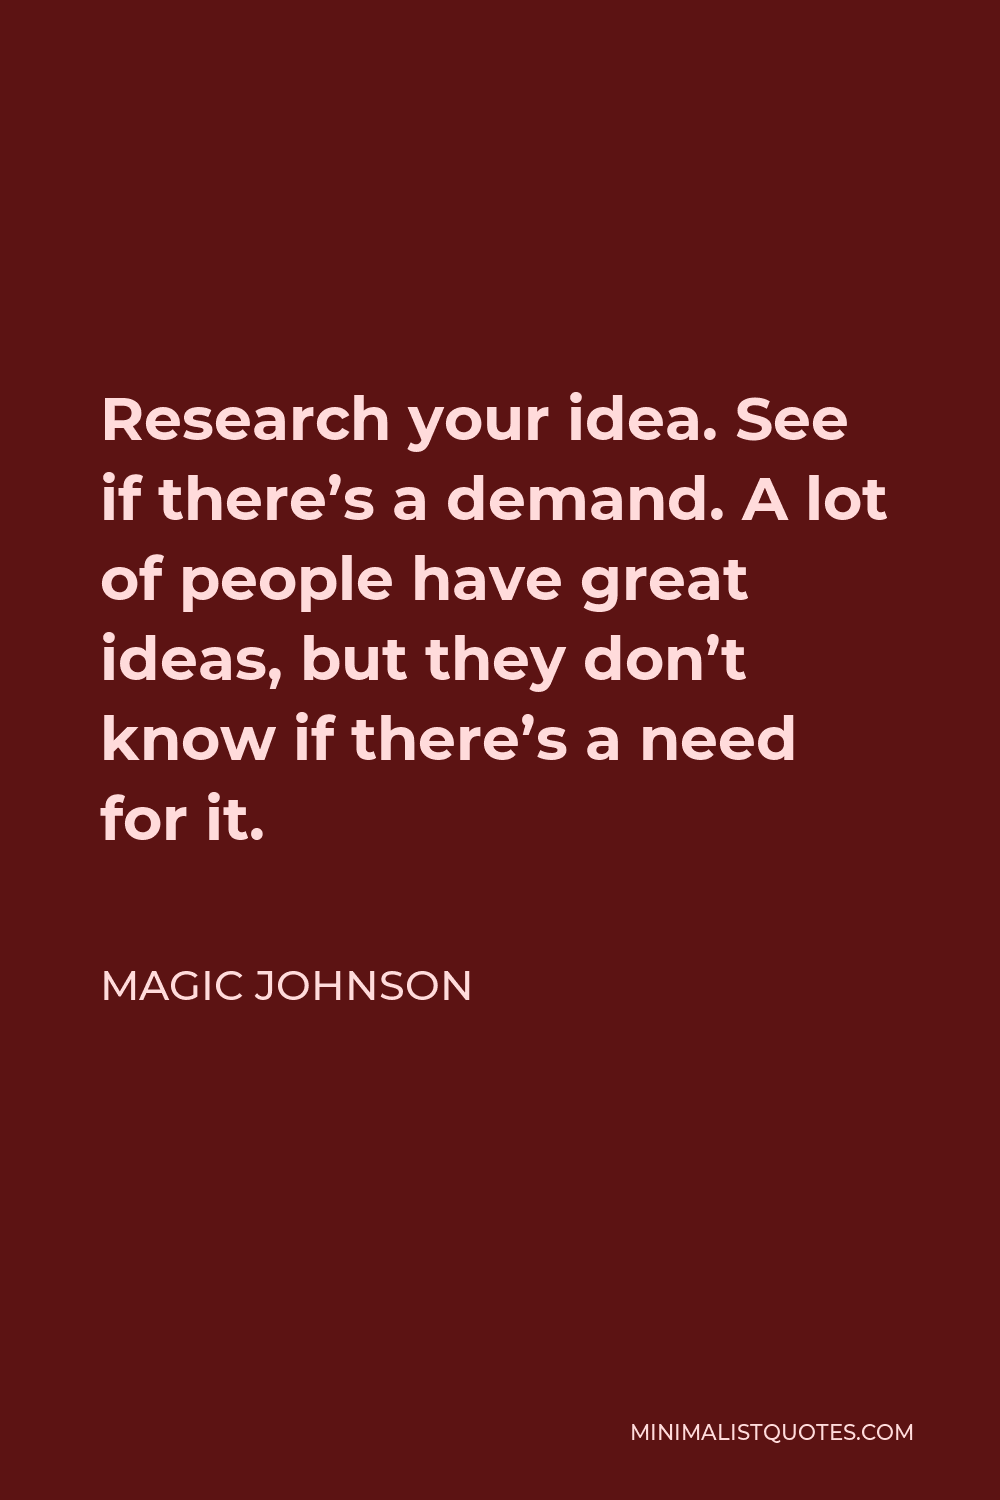 Magic Johnson Quote - Research your idea. See if there’s a demand. A lot of people have great ideas, but they don’t know if there’s a need for it.